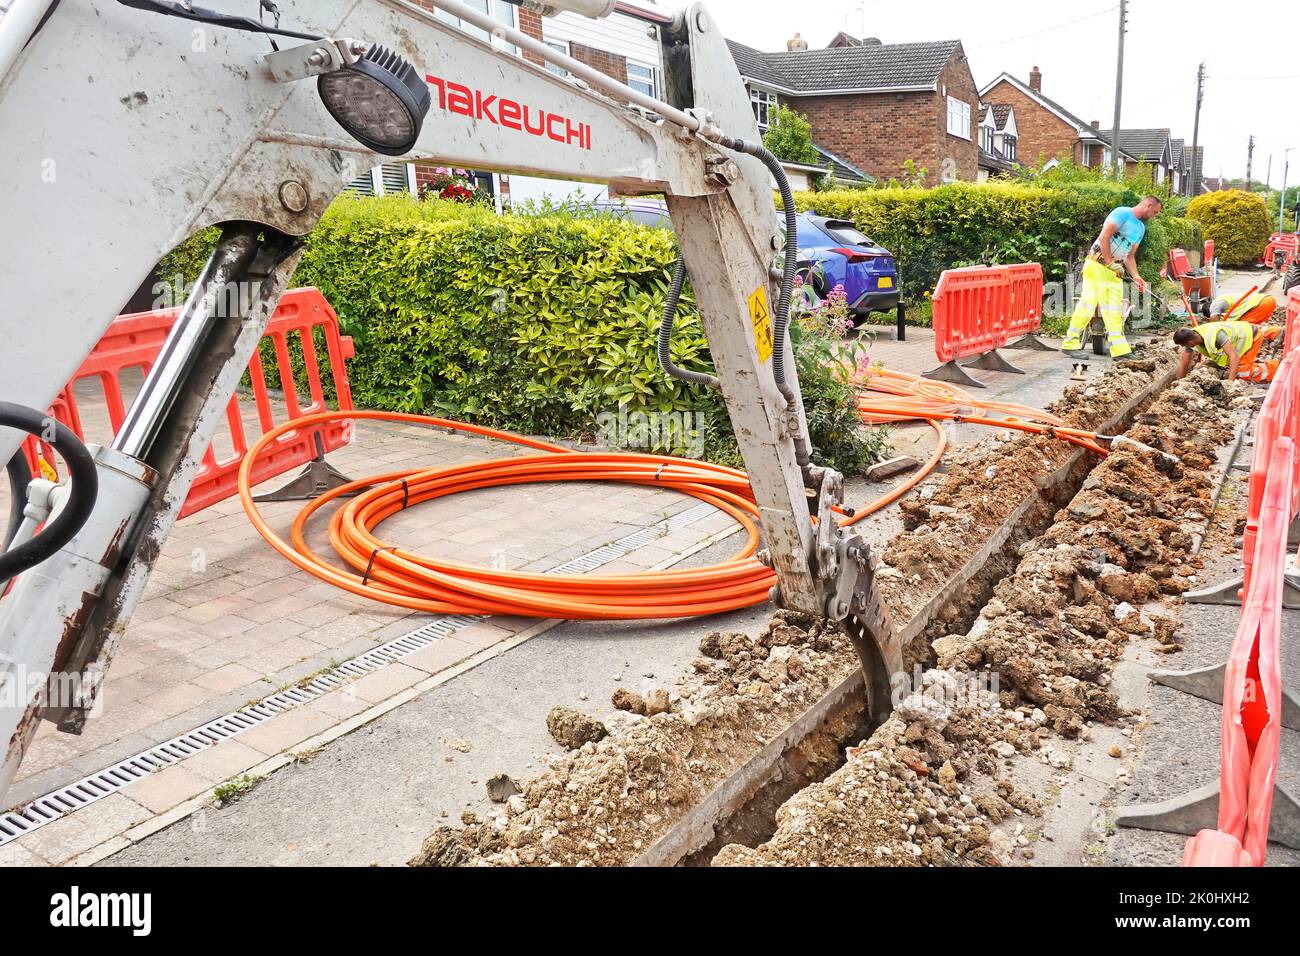 Close up mini digger excavator machine narrow trench channel in pavement for orange fibre optic broadband cable being positioned by workmen England UK Stock Photo